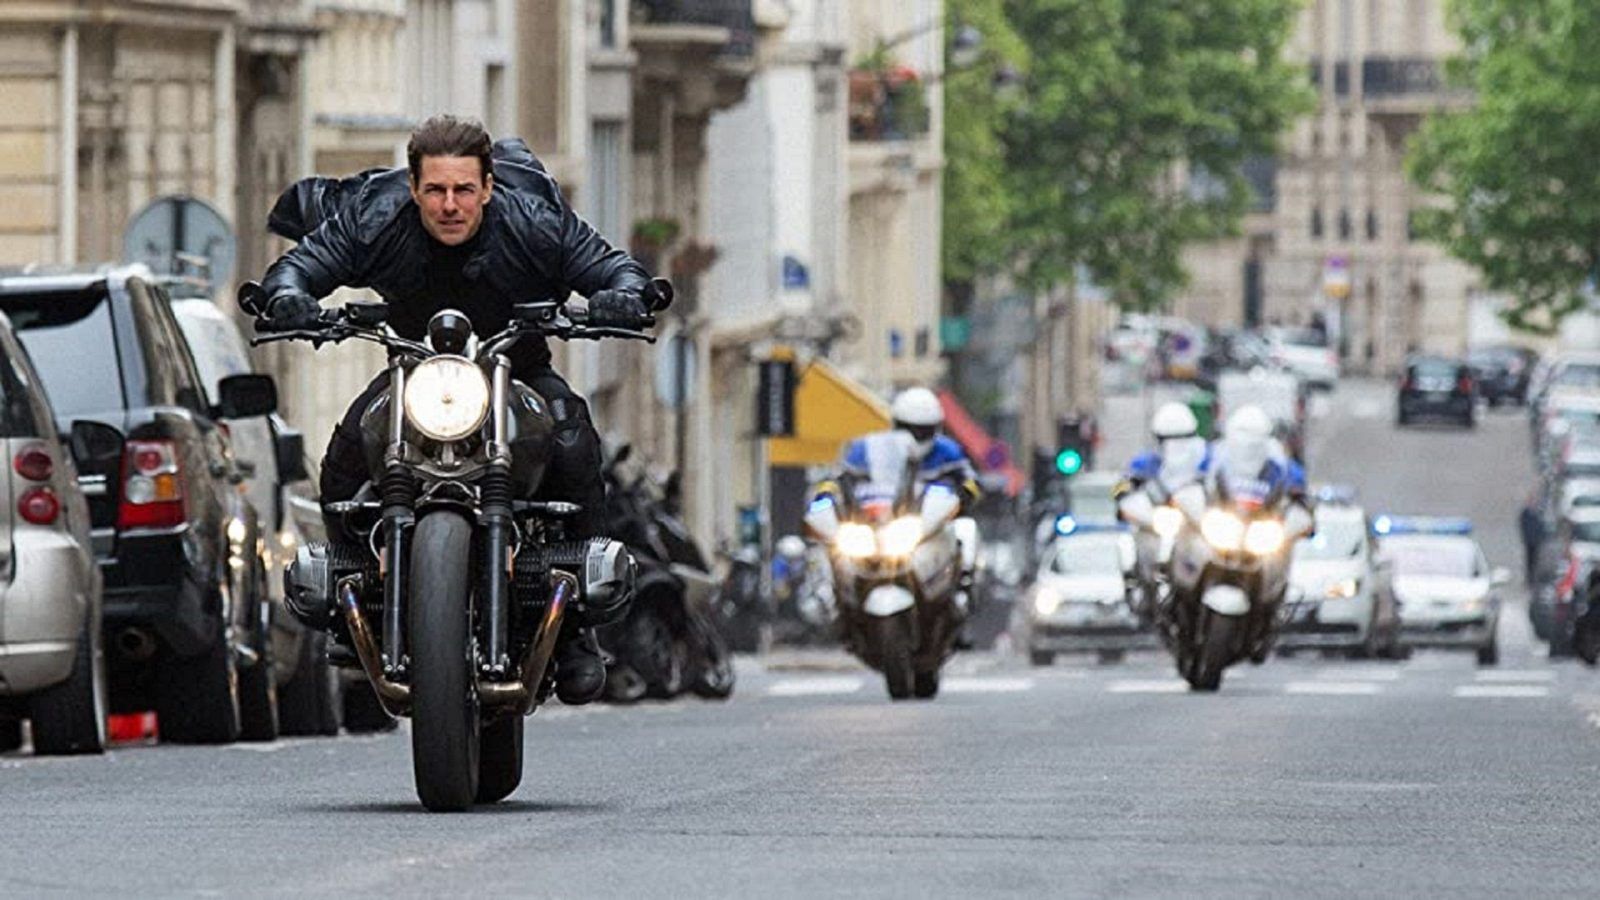 10 ‘Mission: Impossible’ filming locations around the world you can visit